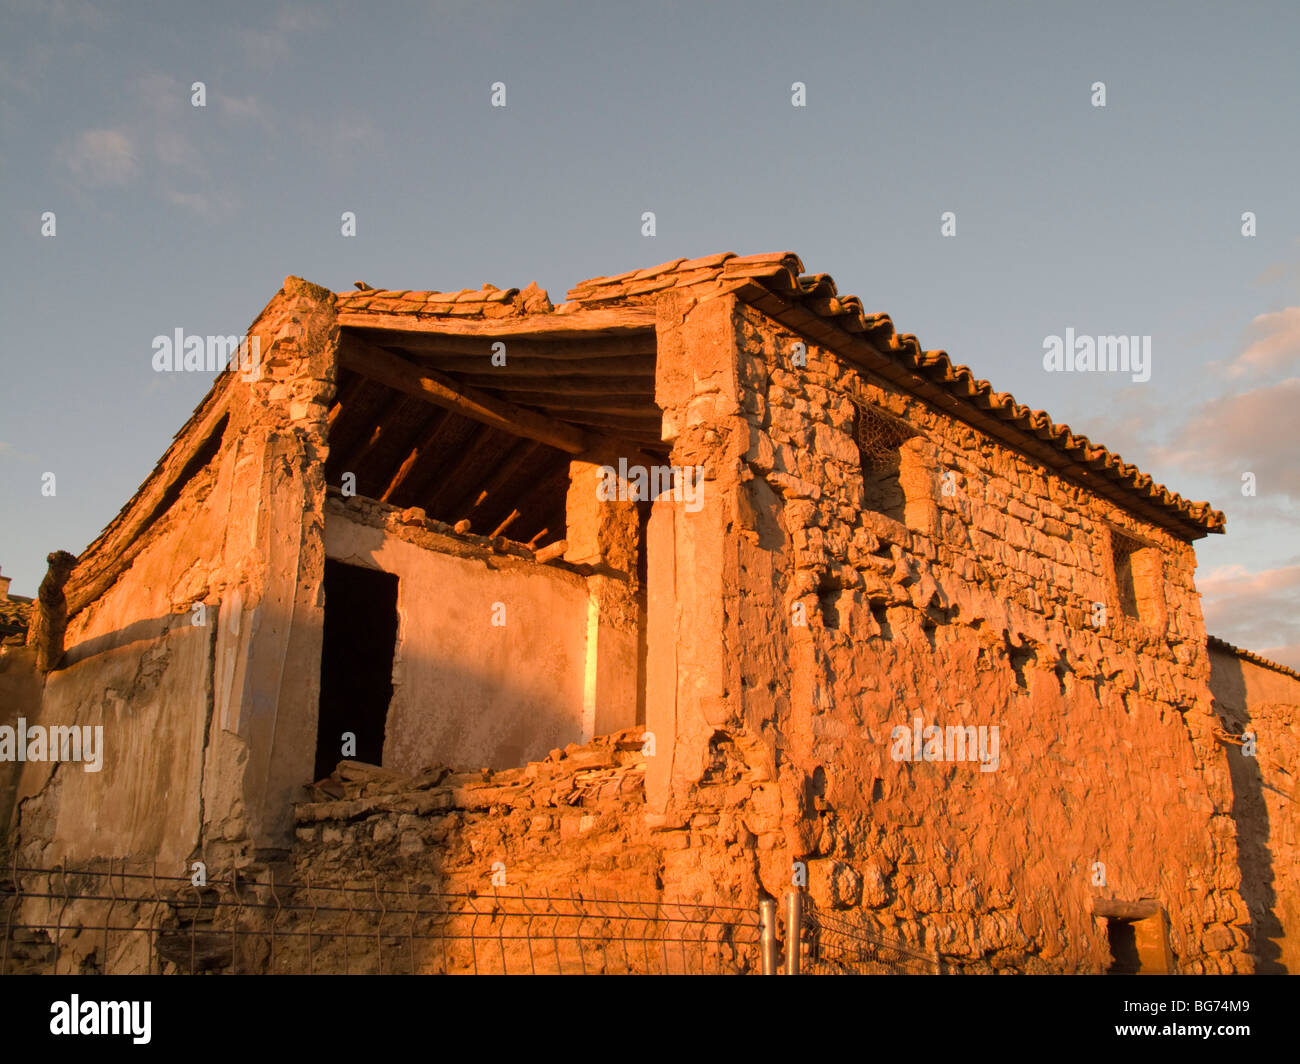 Ruined collapsed rural house, Spain Stock Photo